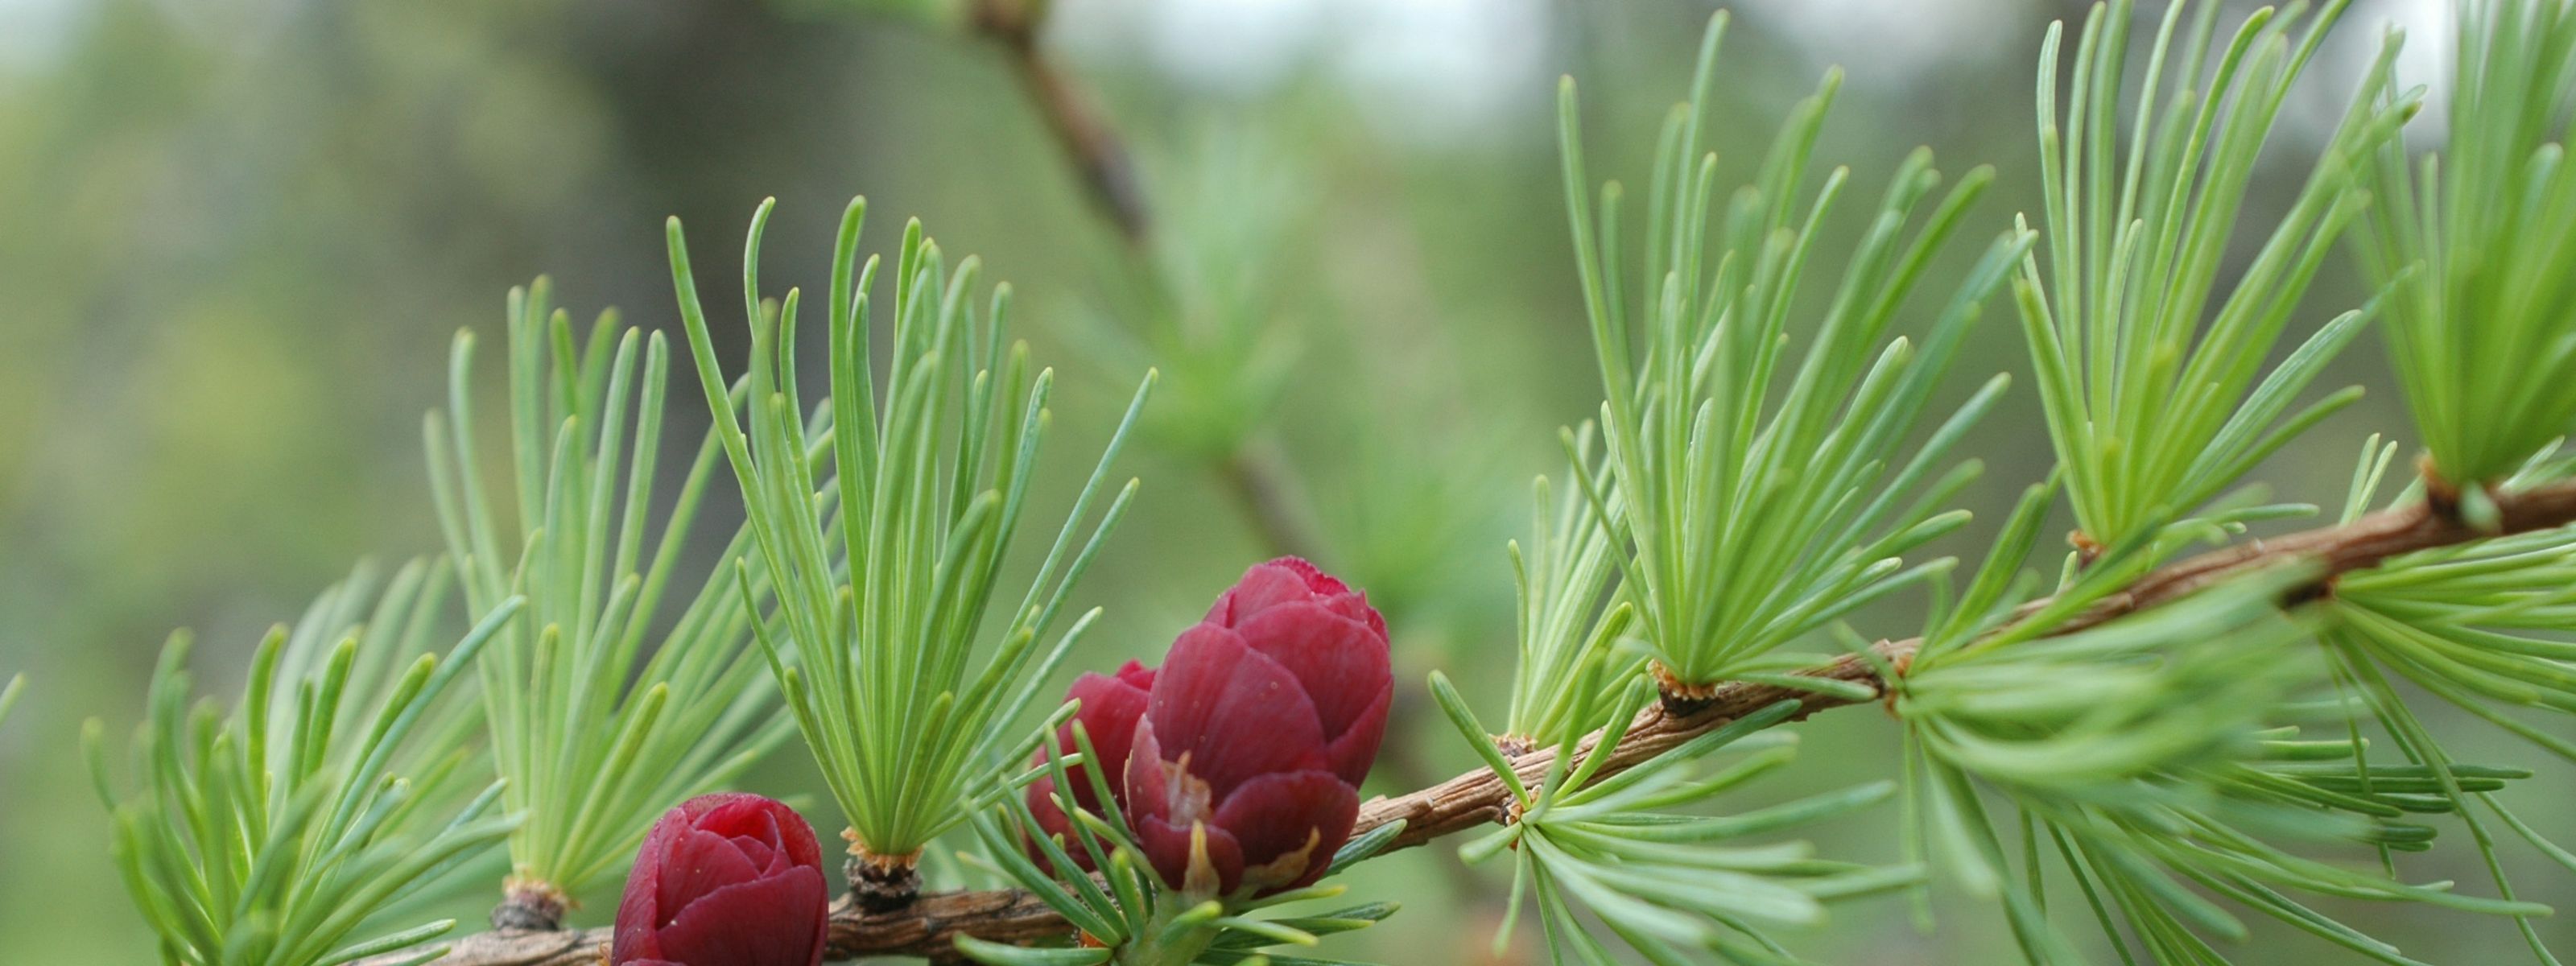 A close up of a brown branch with small green pines and three clustered red berries growing off of it.